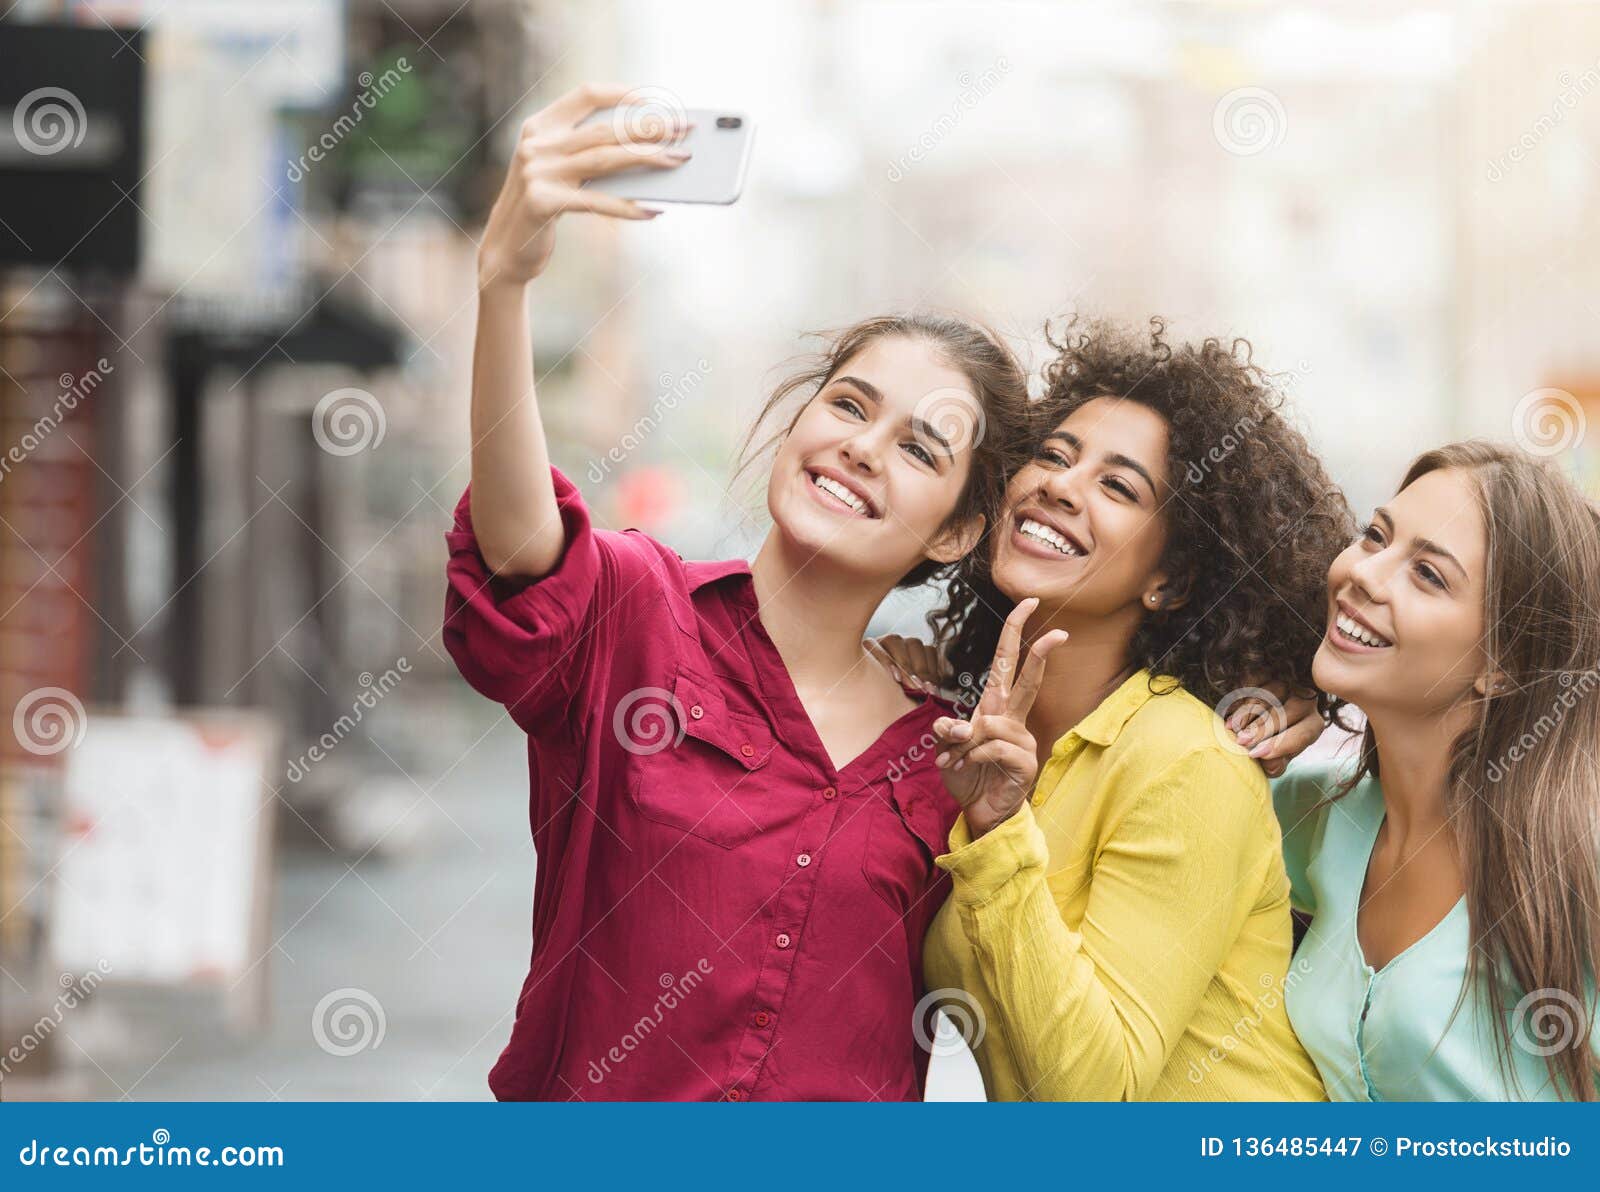 Diverse Happy Women Walking in the City Stock Image - Image of pretty ...